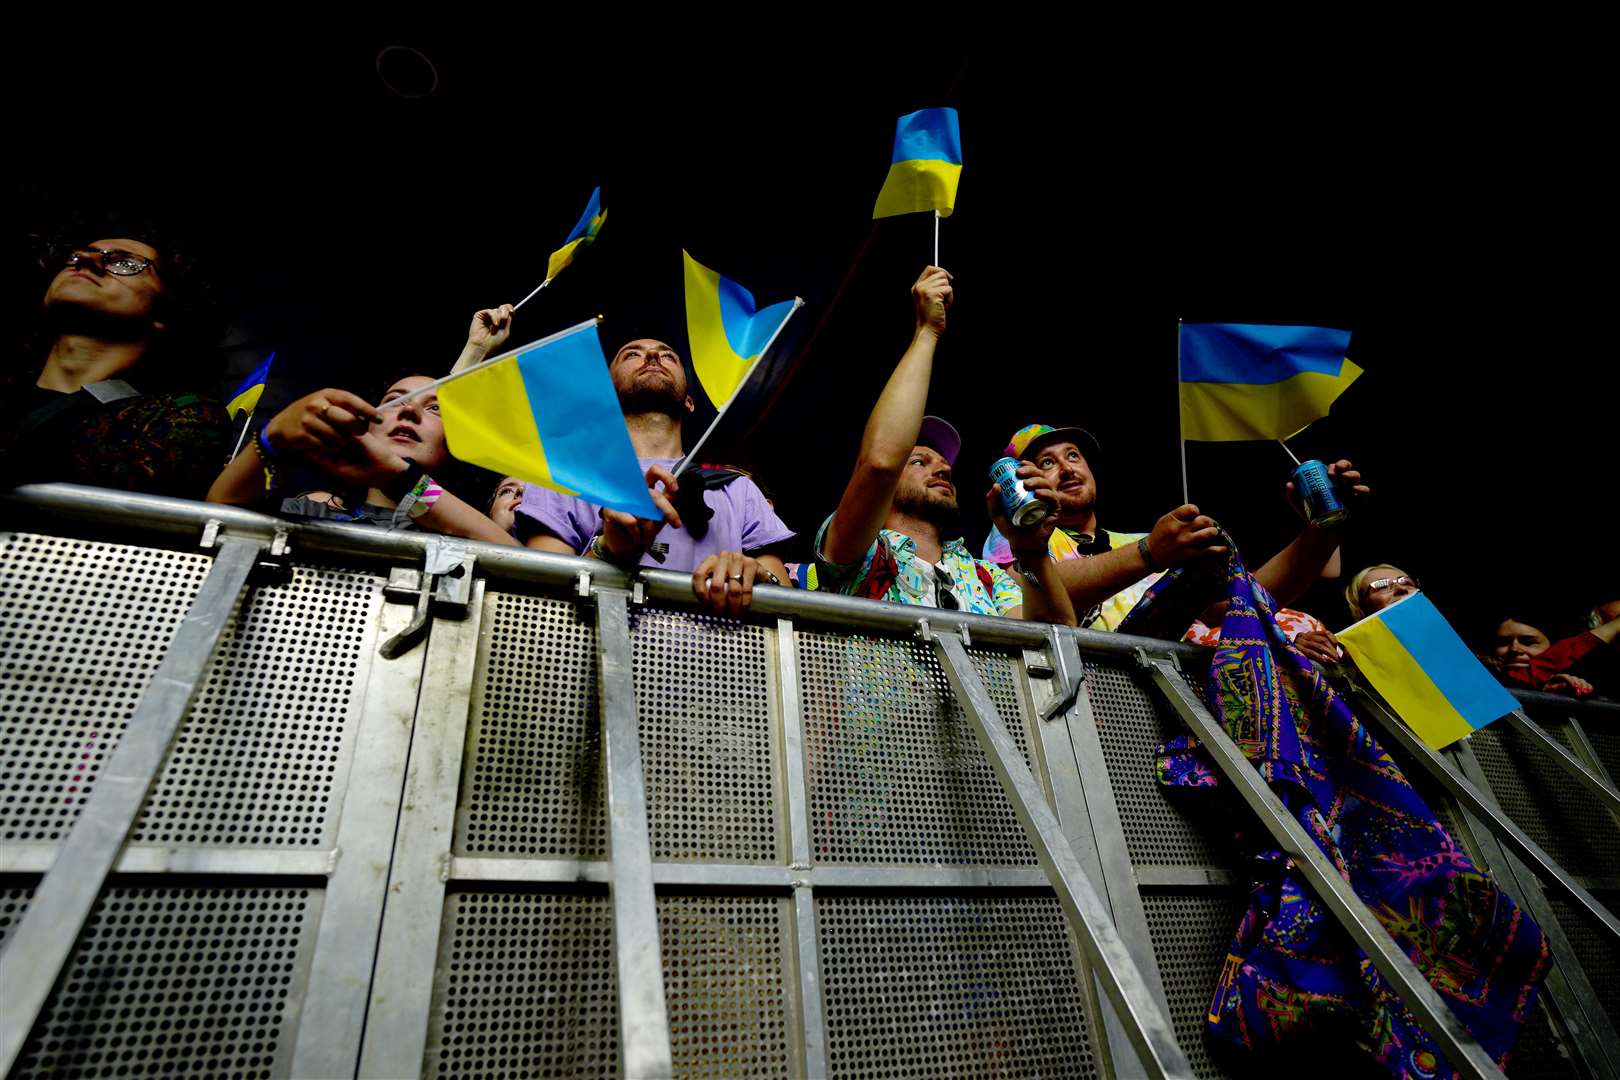 Crowds watch the Ukrainian group Go_A performing on the John Peel Stage at Glastonbury (Ben Birchall/PA)